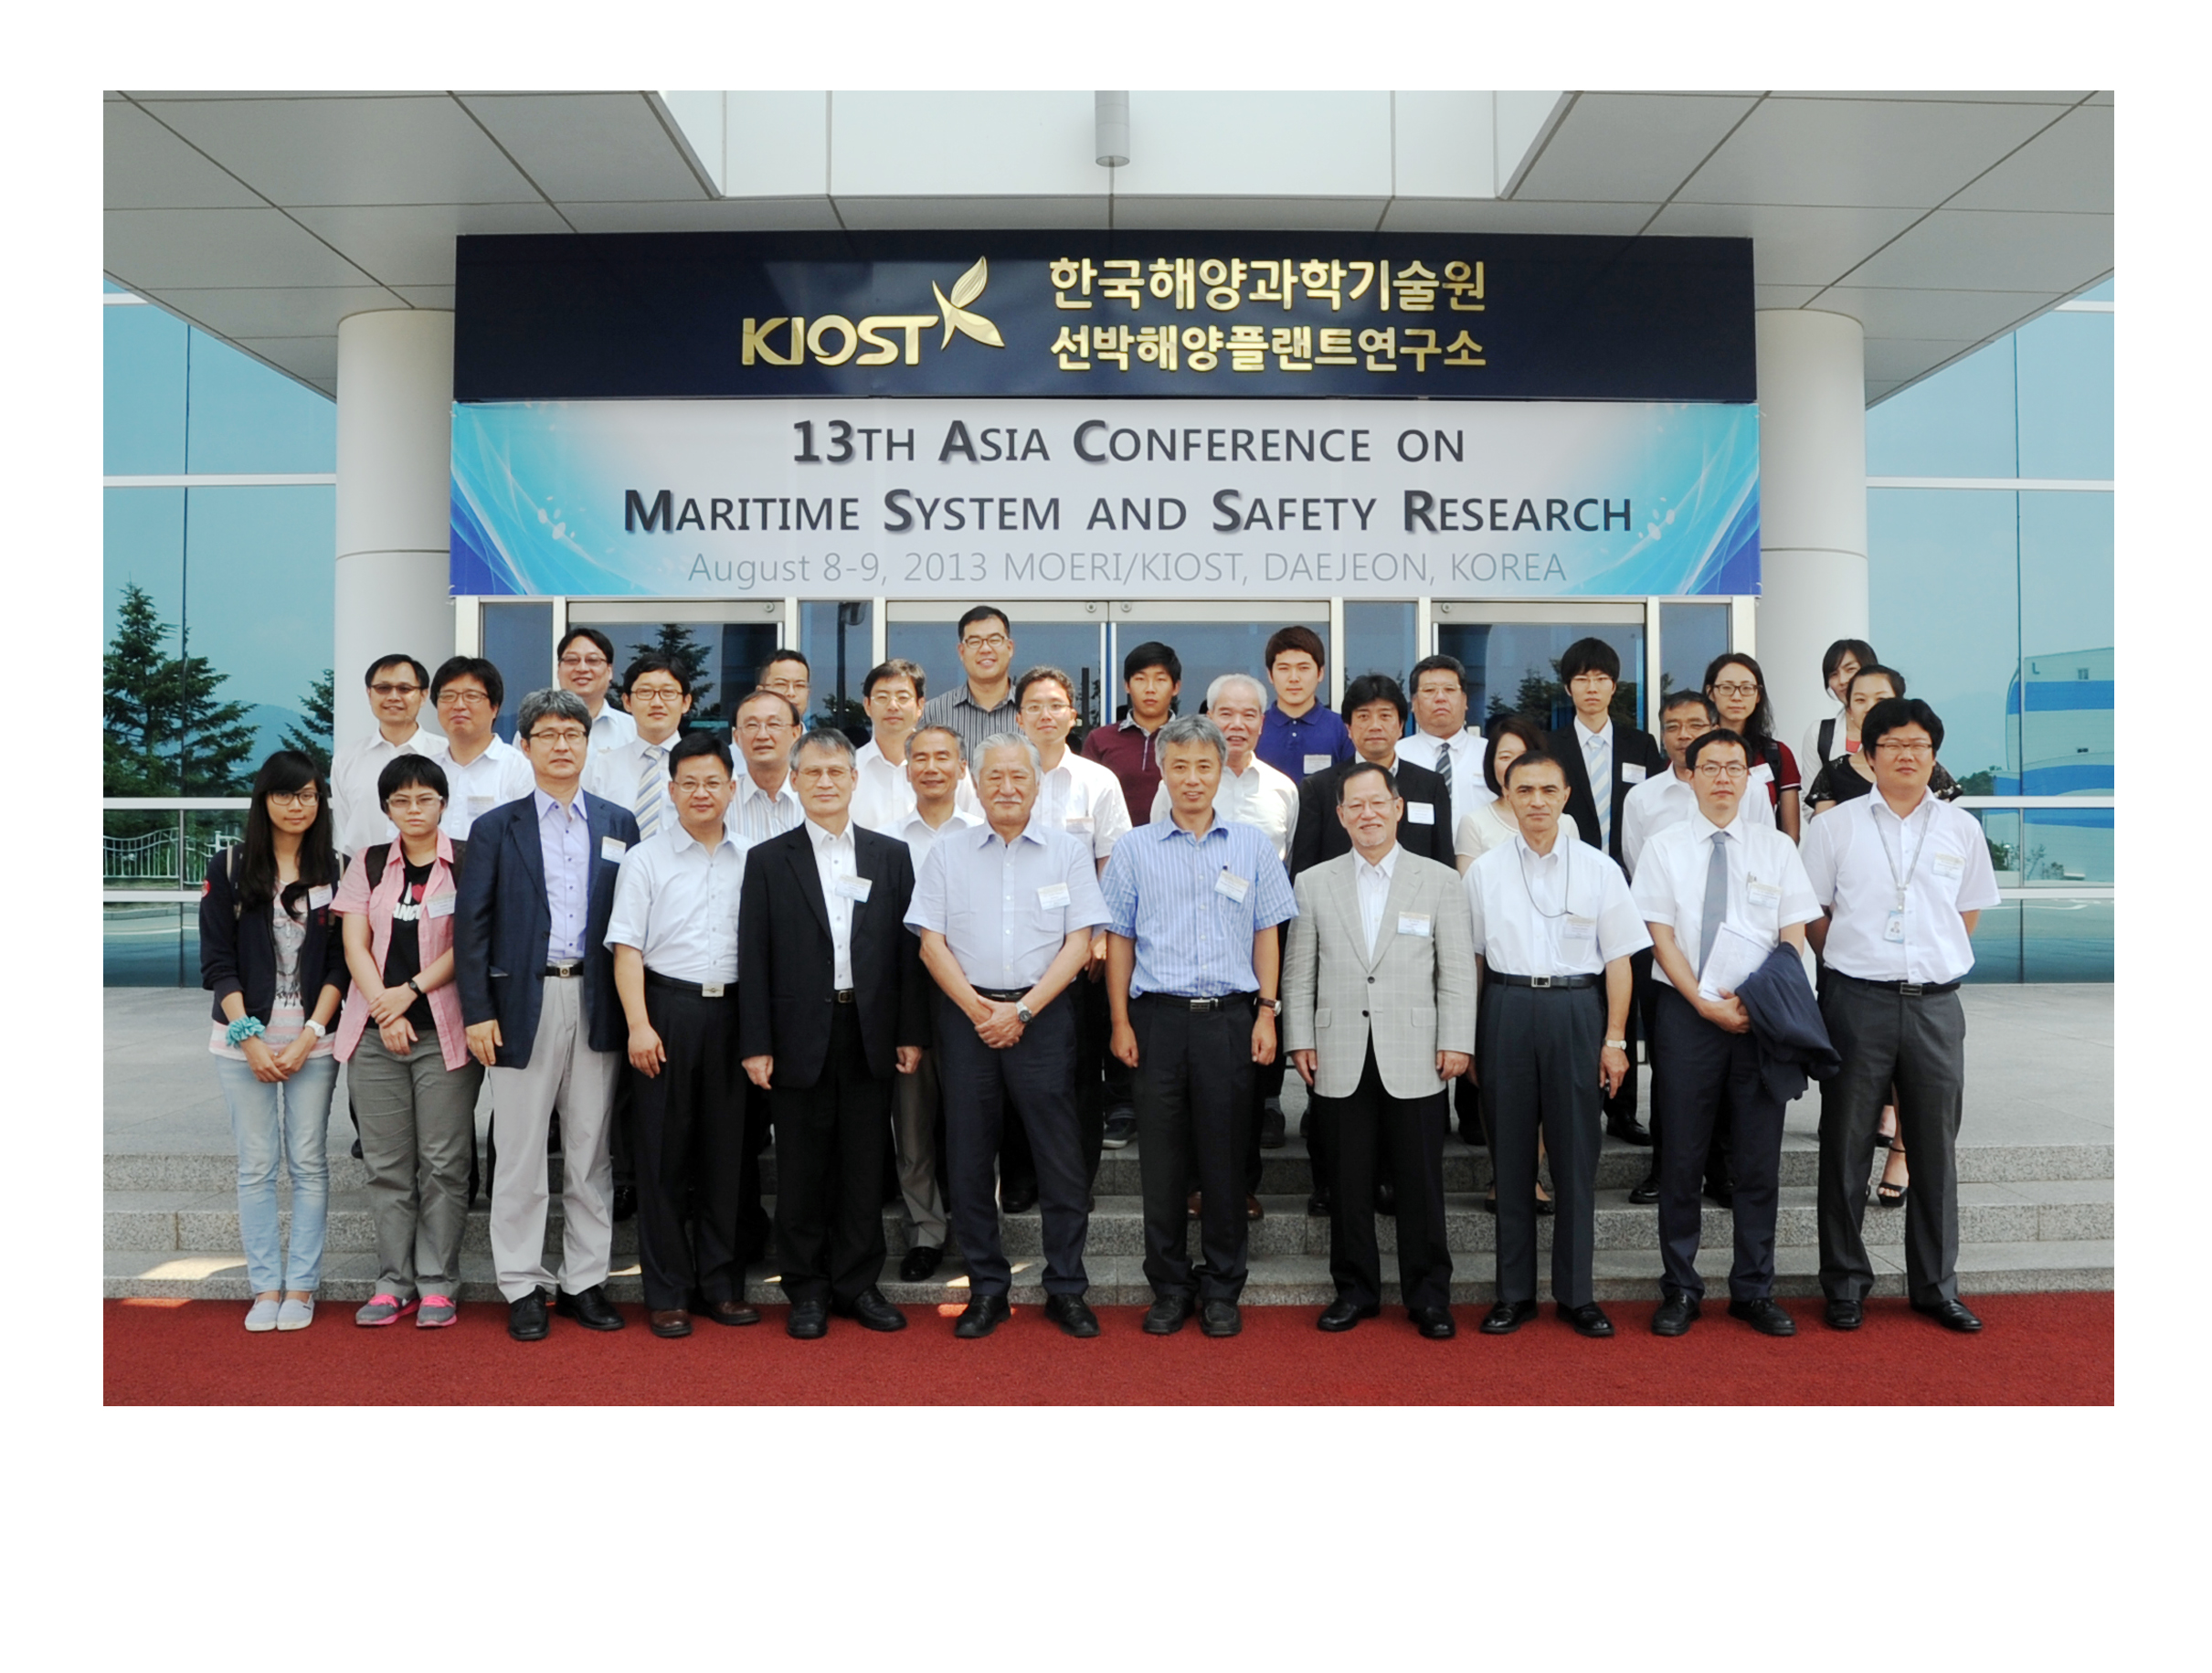 13th ACMSSR(Asia Conference on Maritime System and Safety Research